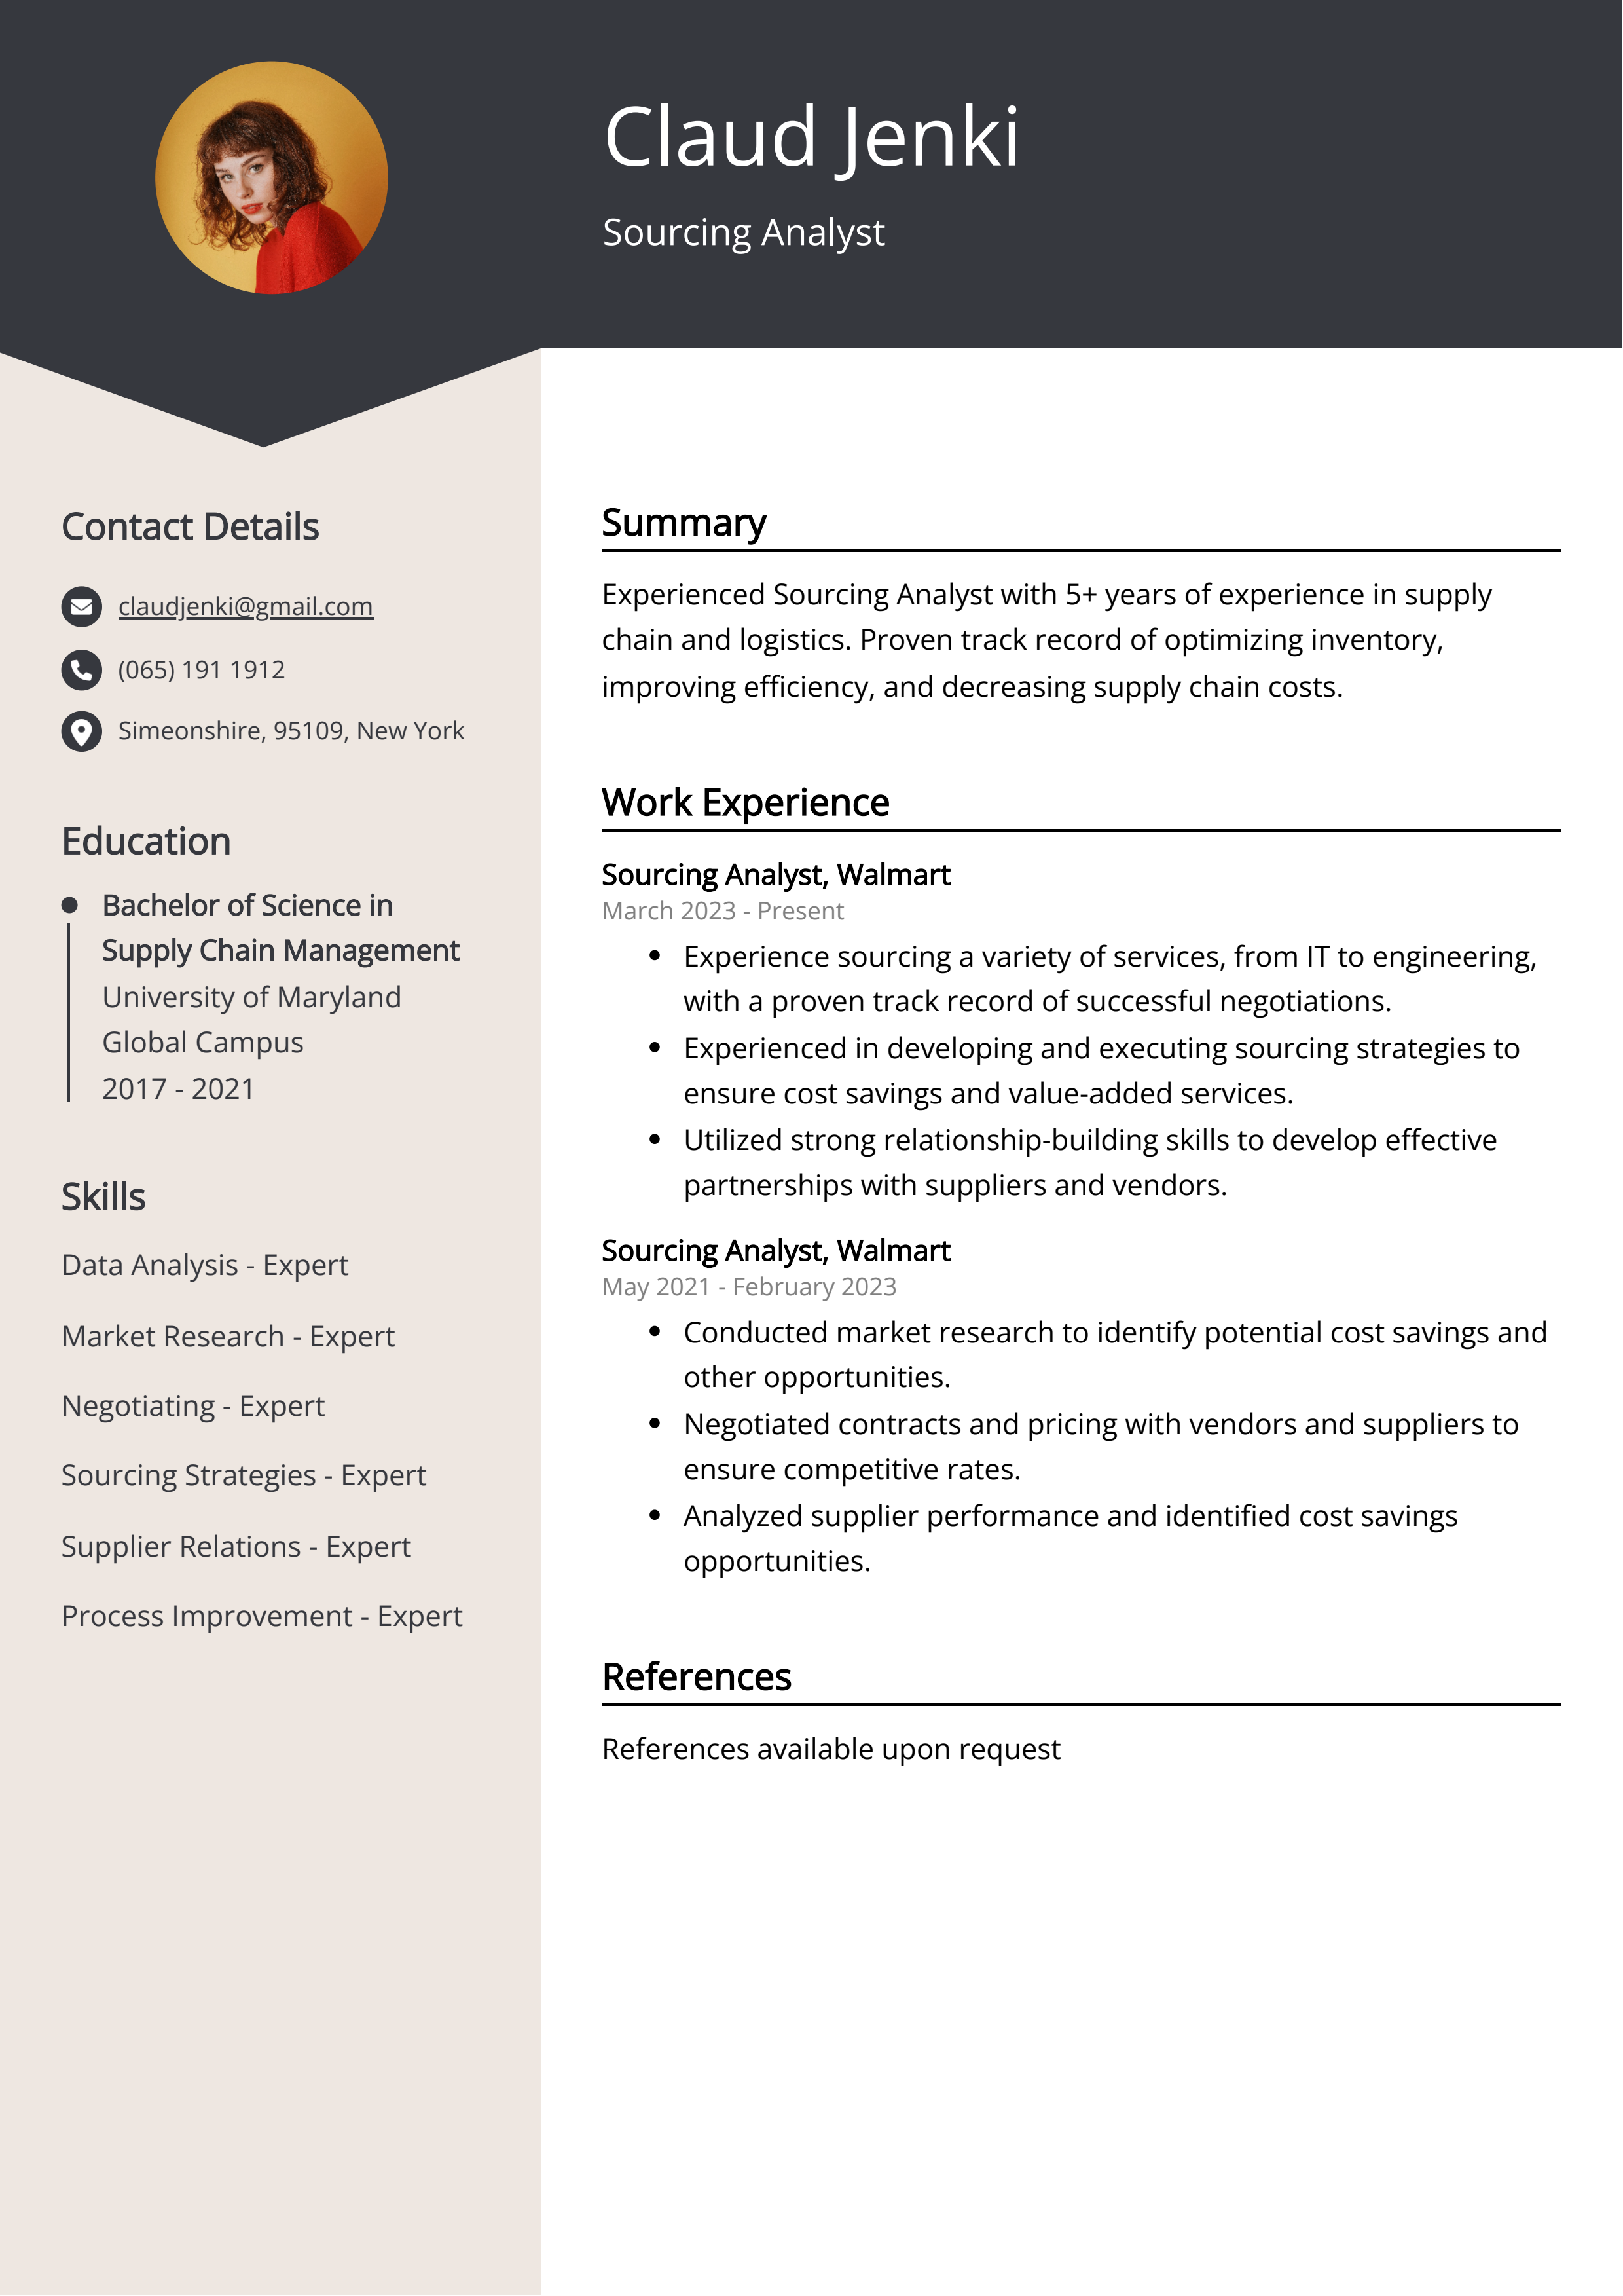 Sourcing Analyst CV Example